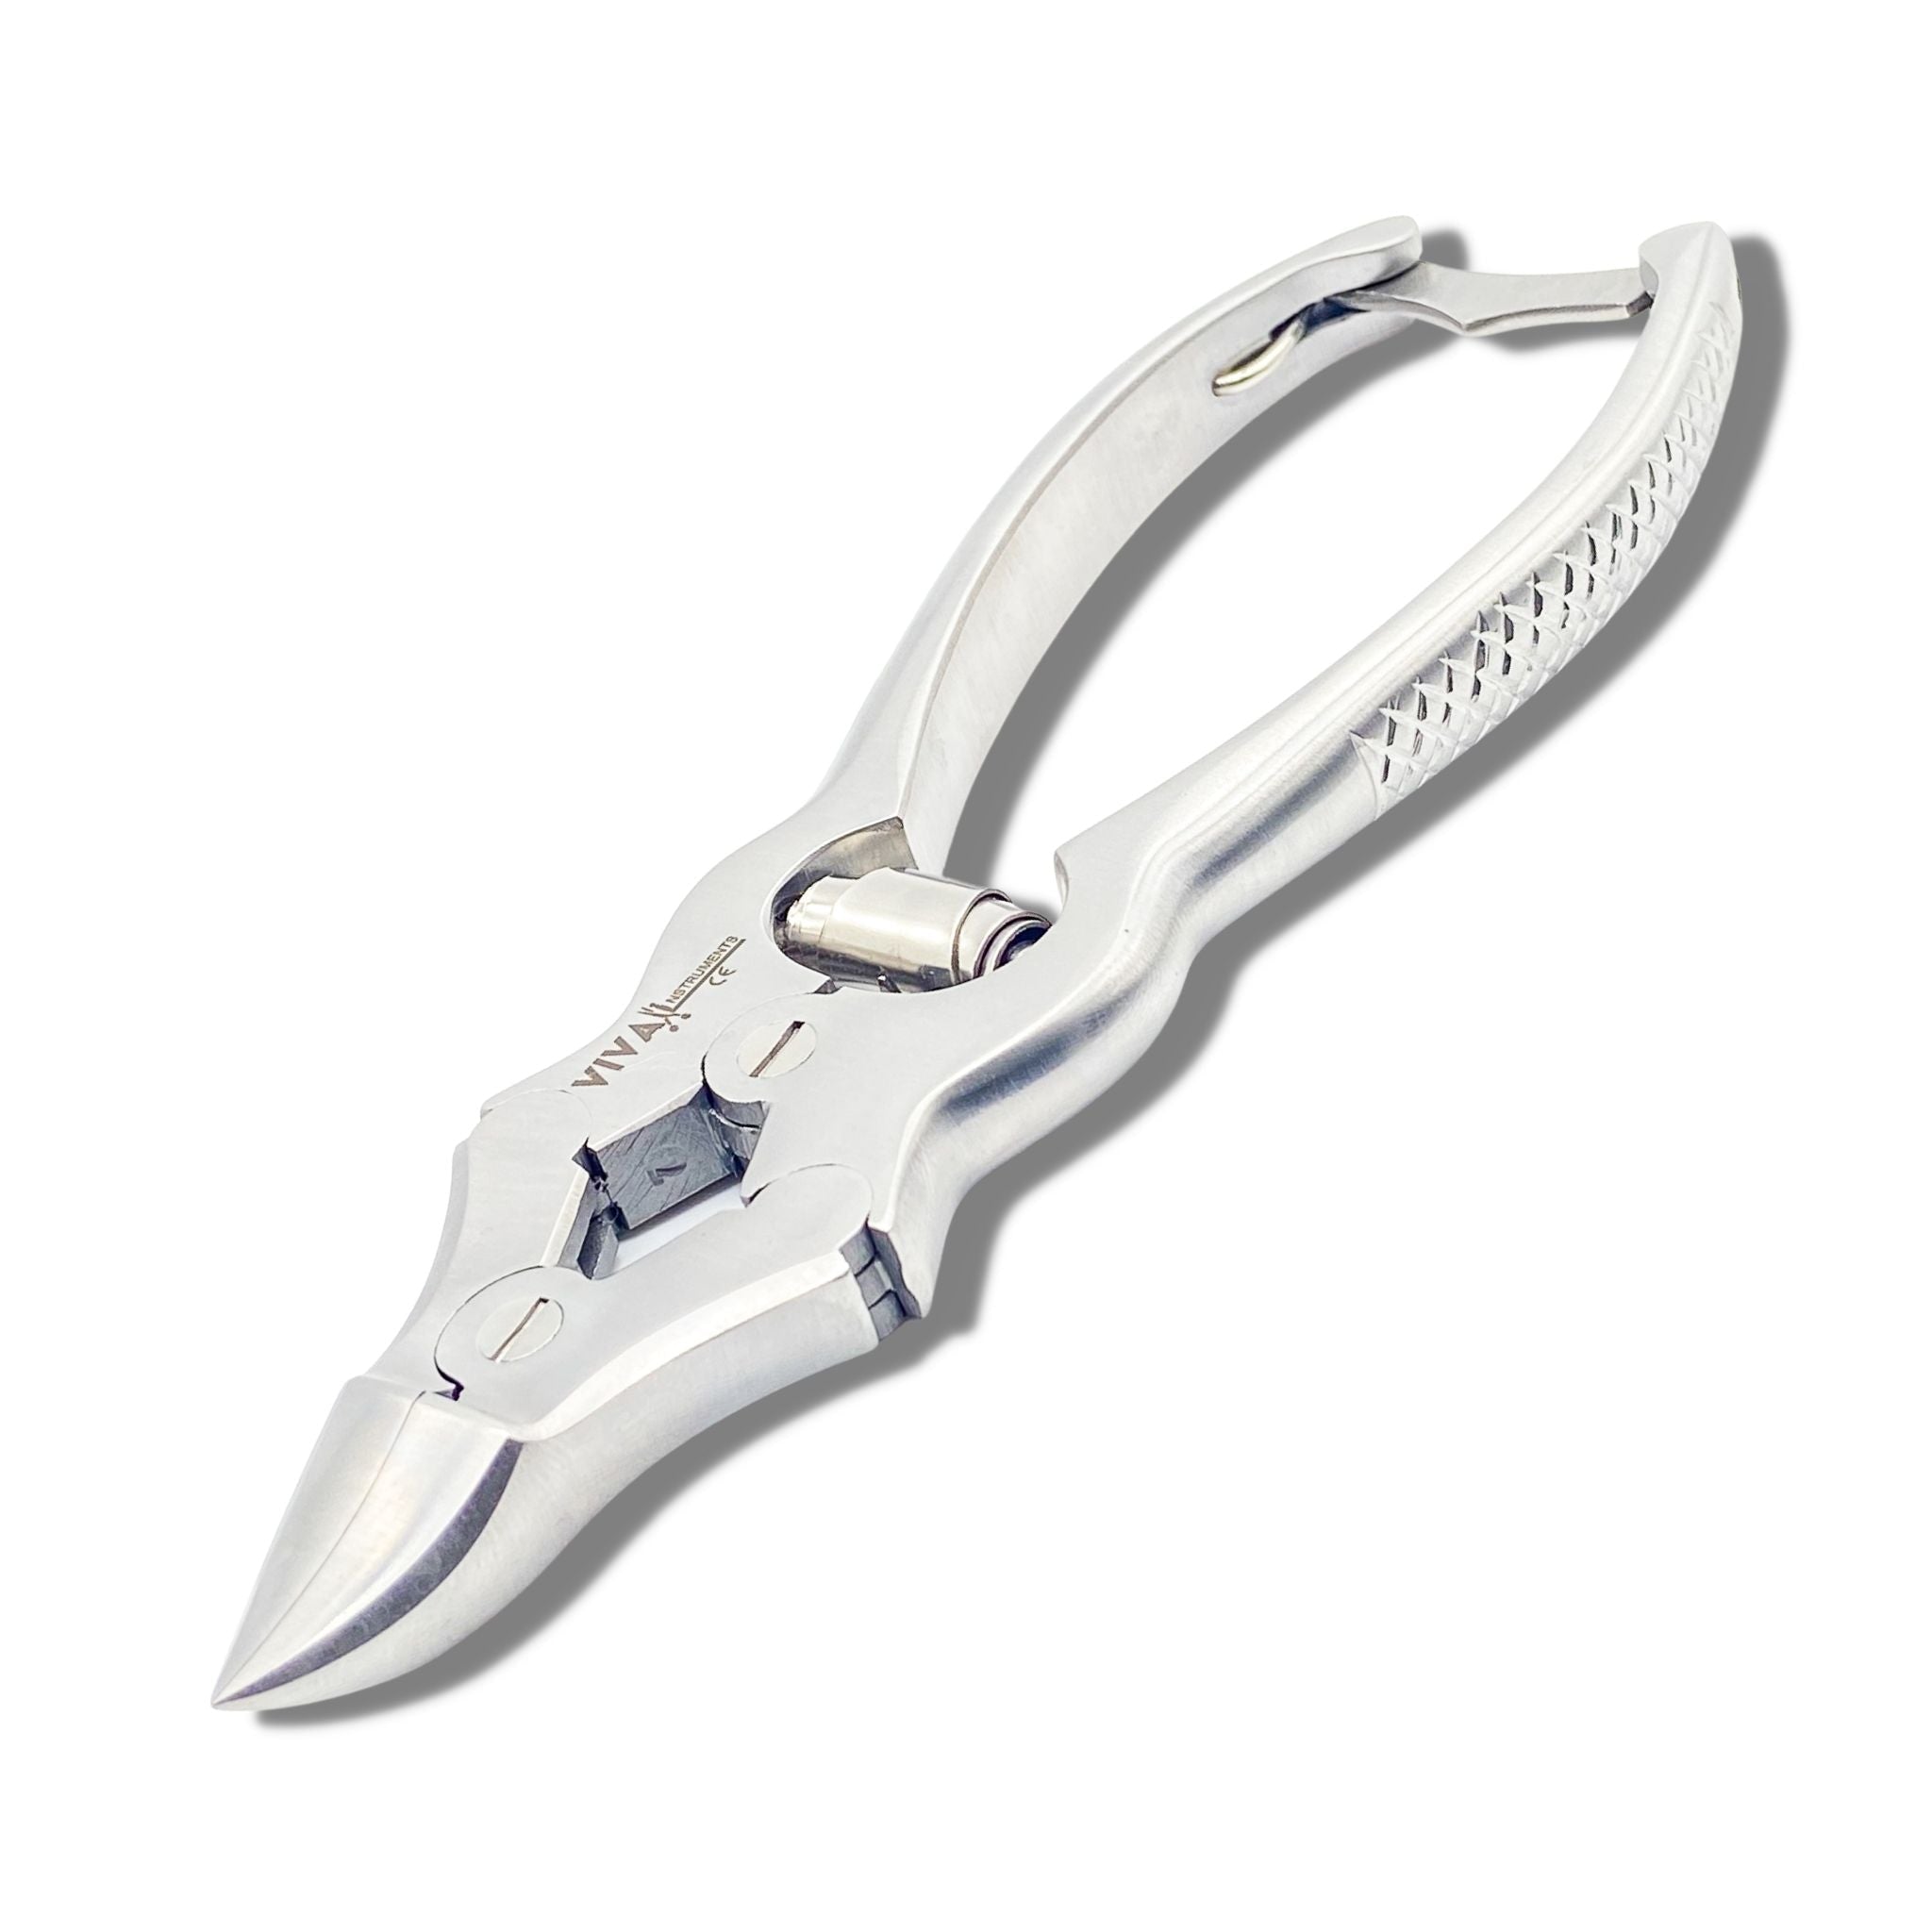 Nail Nipper - Cantilever Nipper | Concave Angled Podiatry Instruments